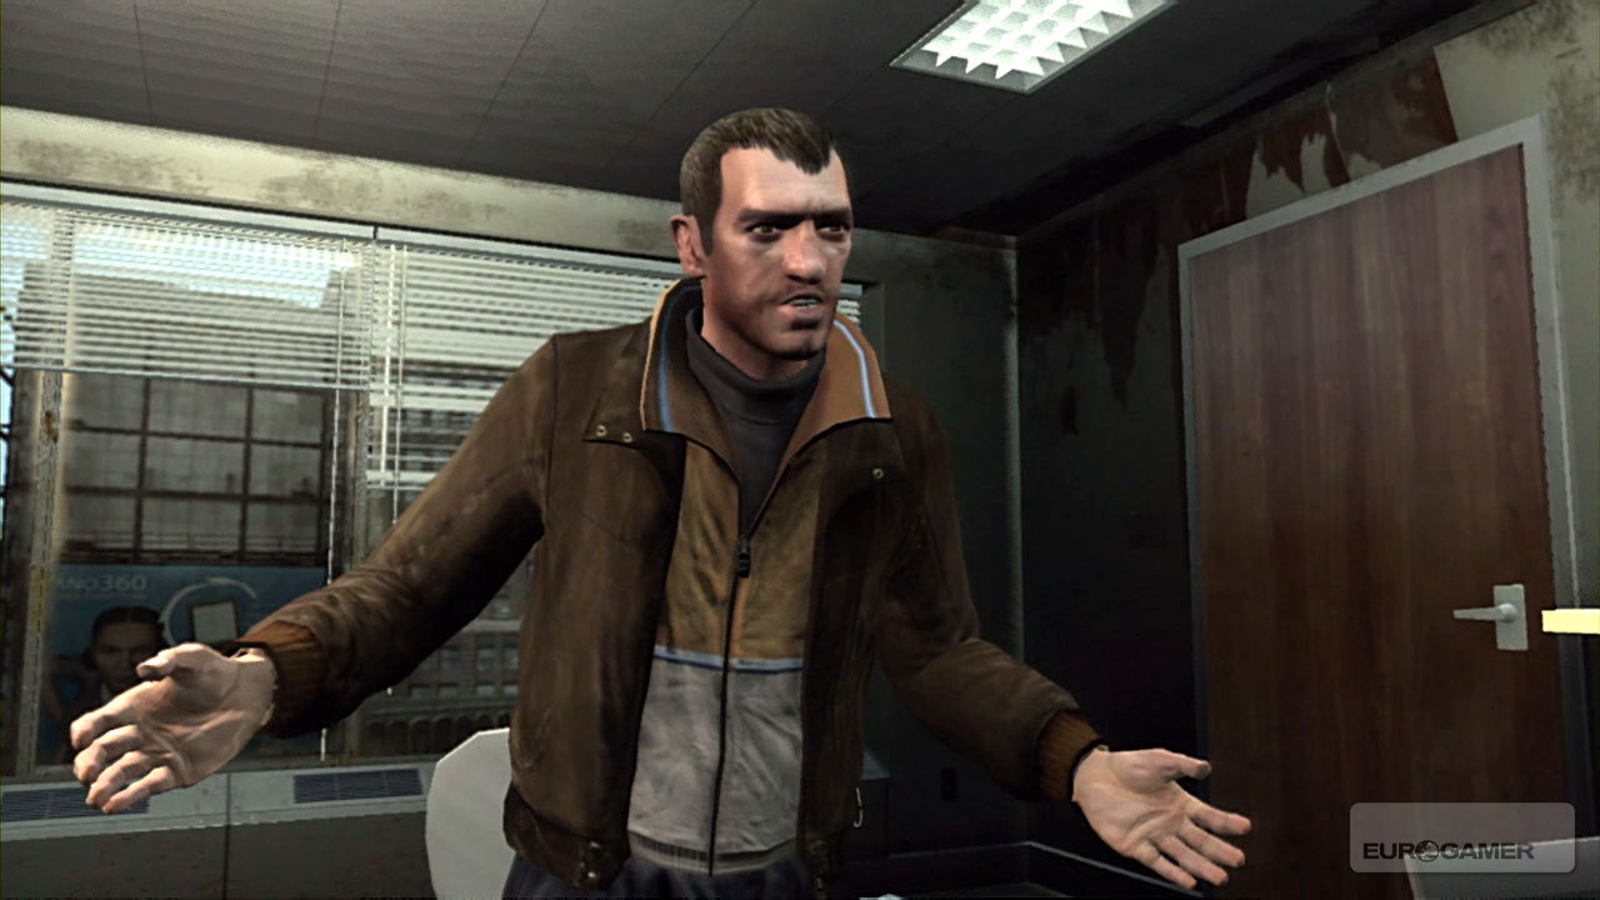 Players rush to download popular GTA 4 mod compilation following